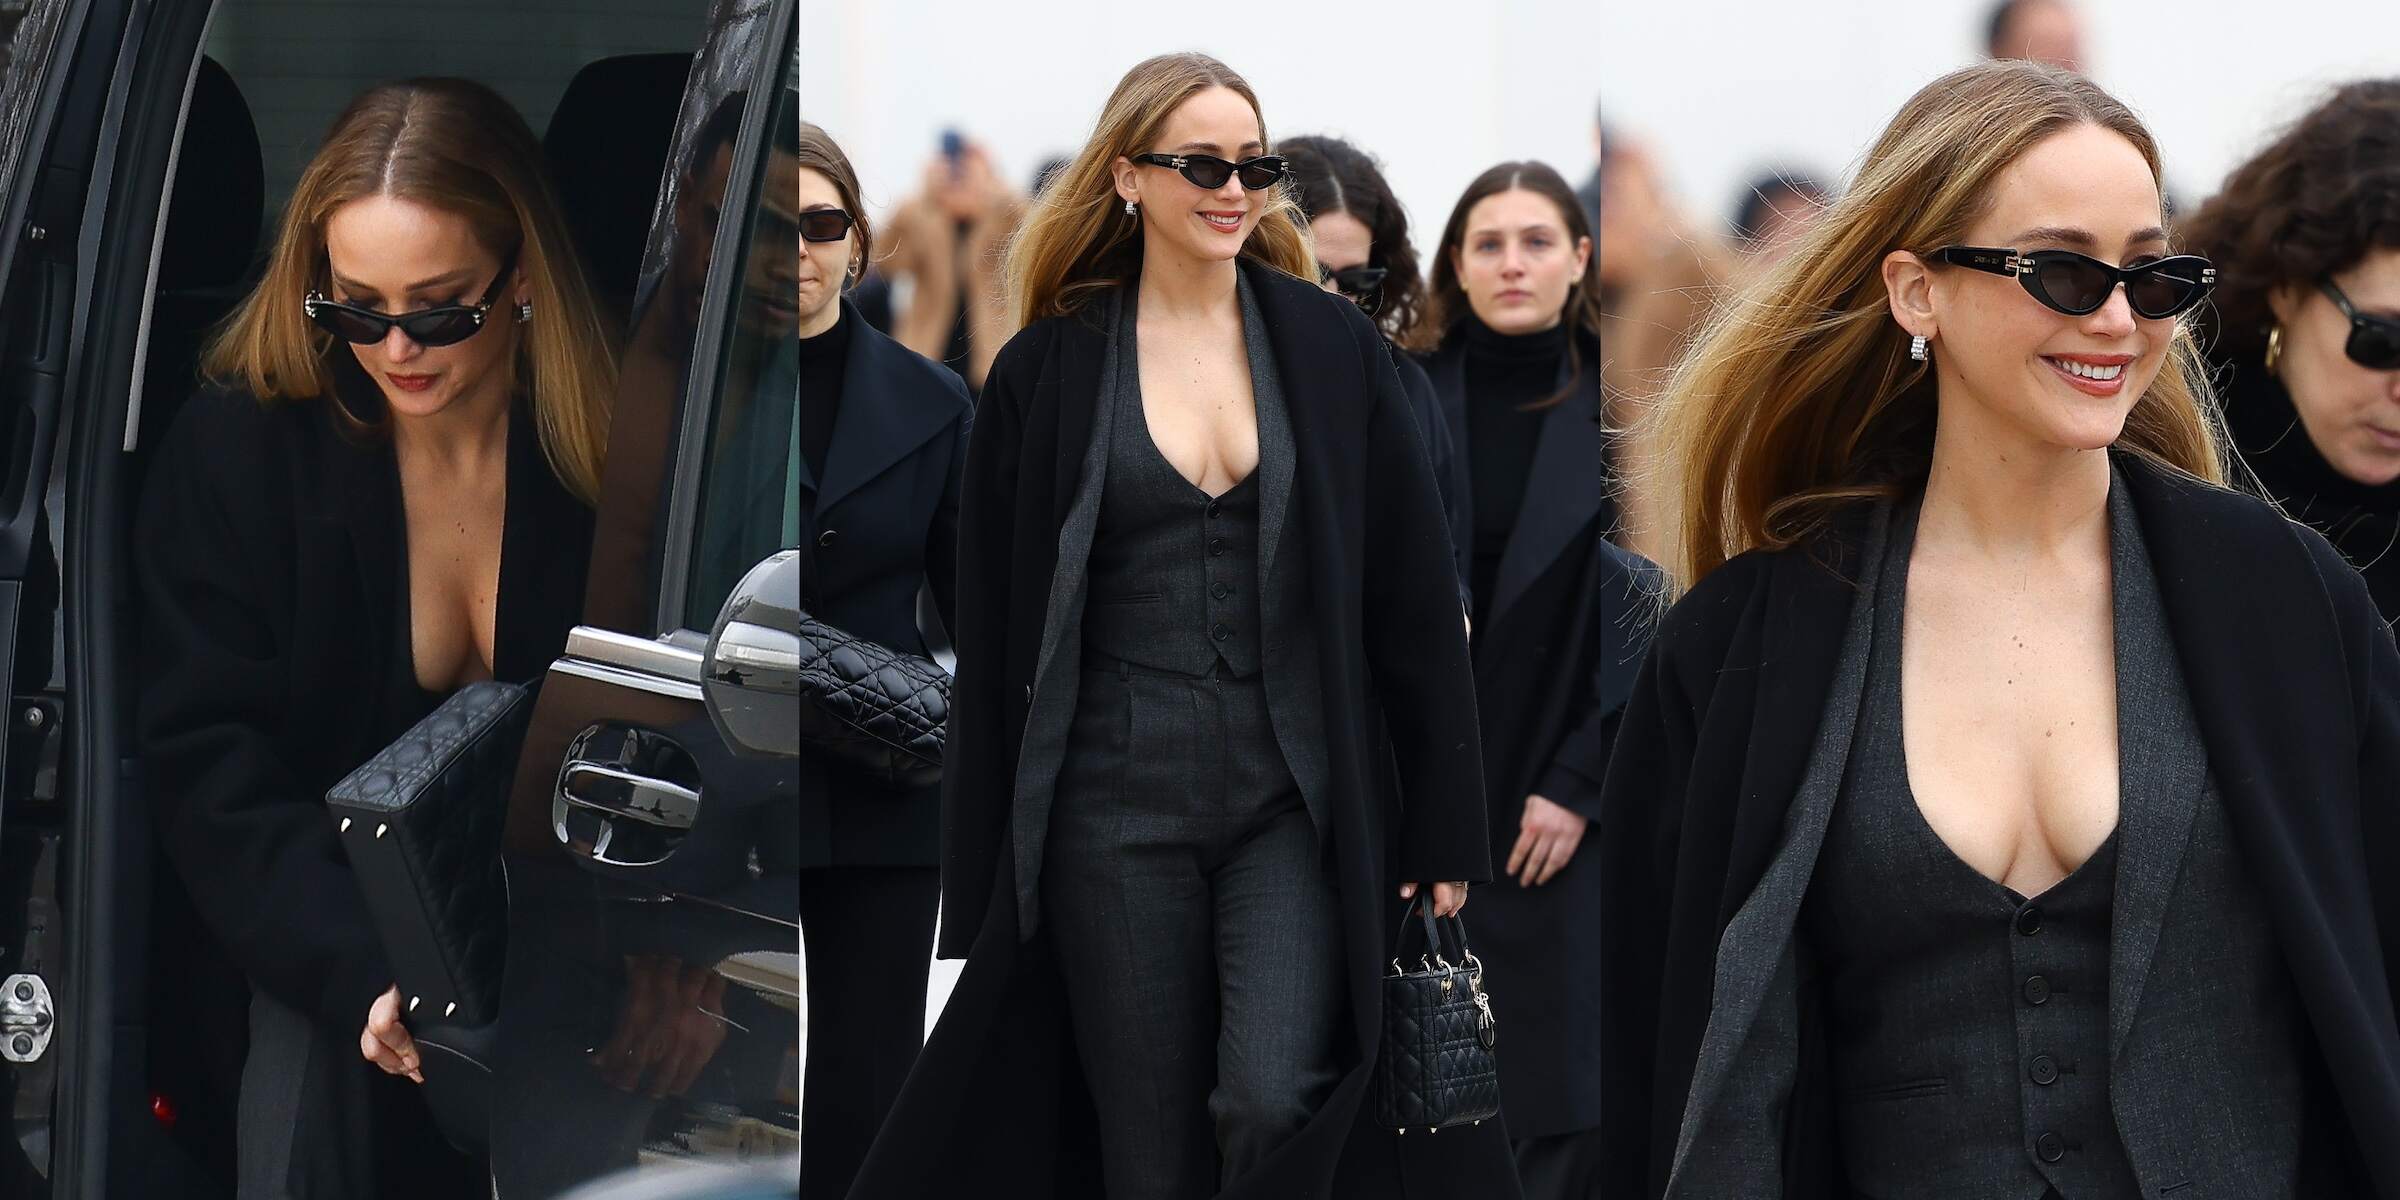 Actress Jennifer Lawrence wears a business-inspired black and gray outfit while walking to the Christian Dior fashion show in Paris, France